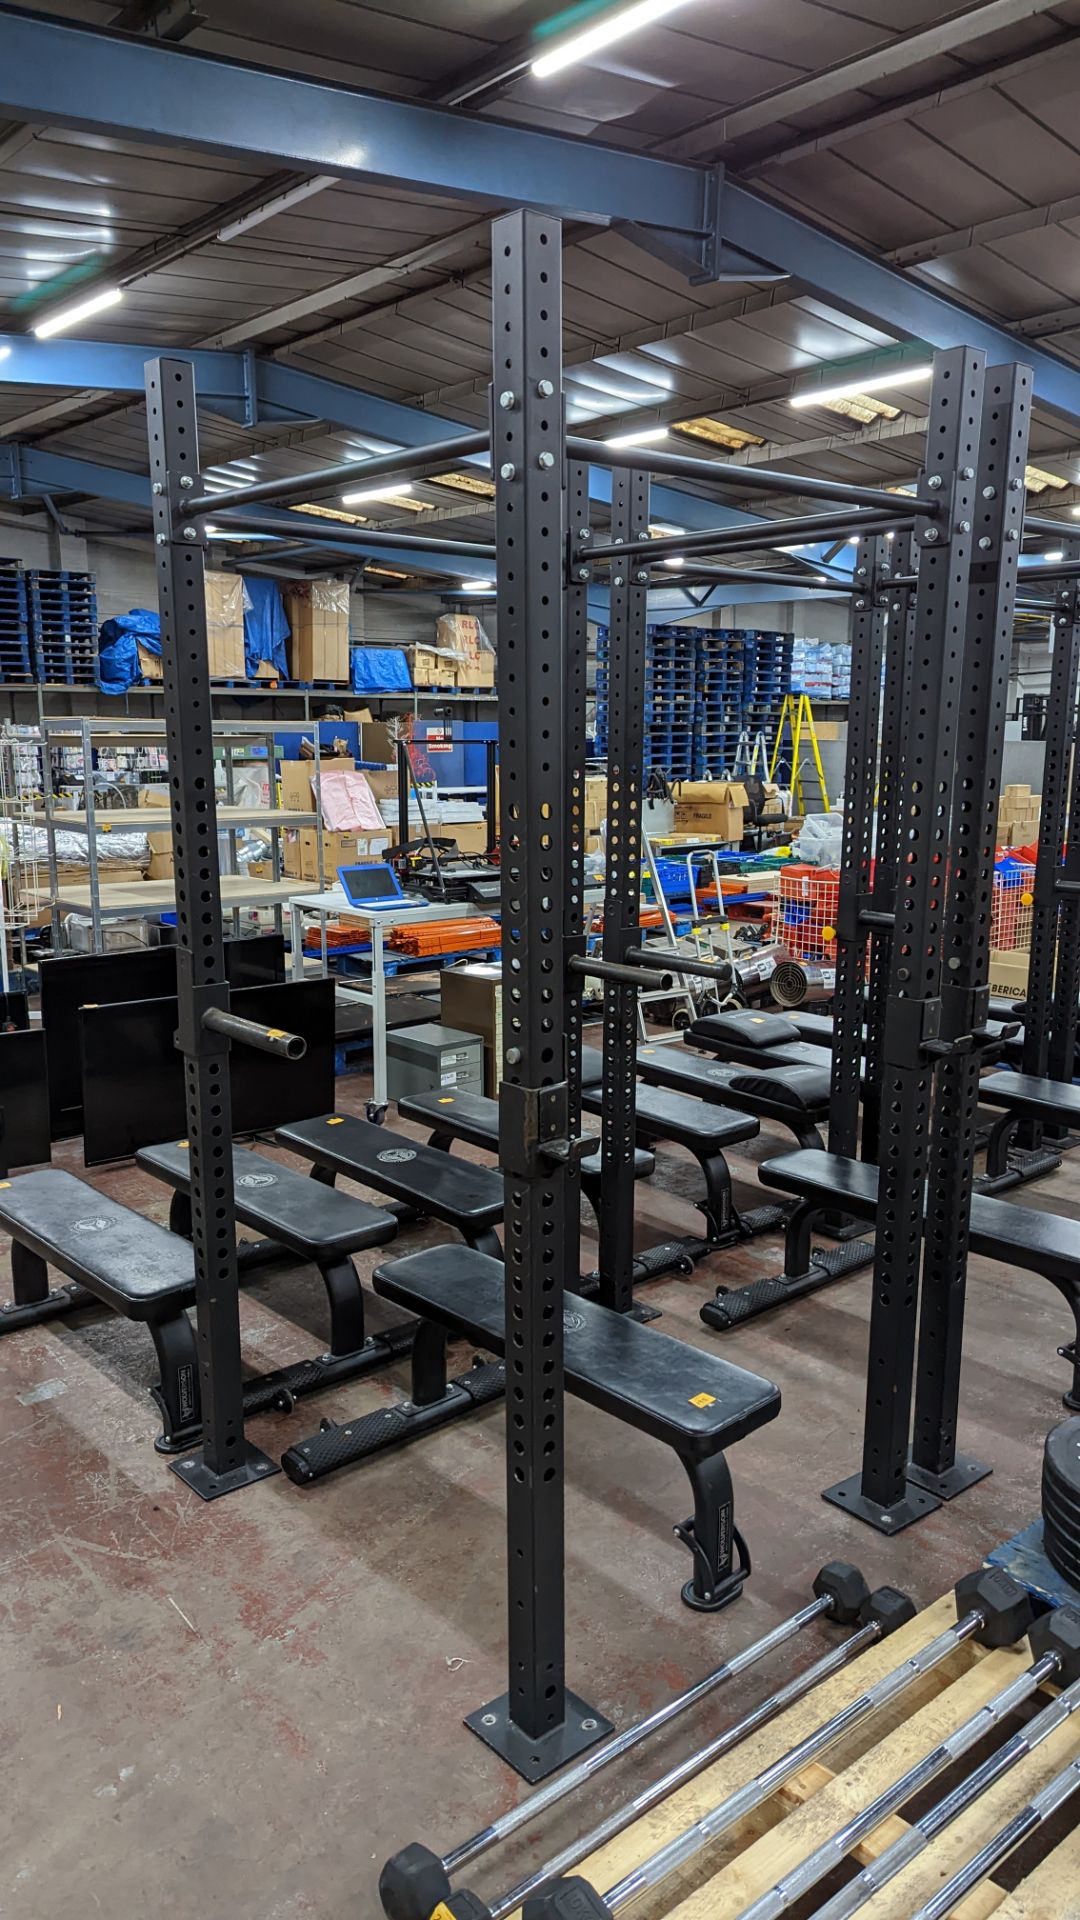 Power Rack comprising four vertical supports (each approximately 250 cms tall), four horizontal rods